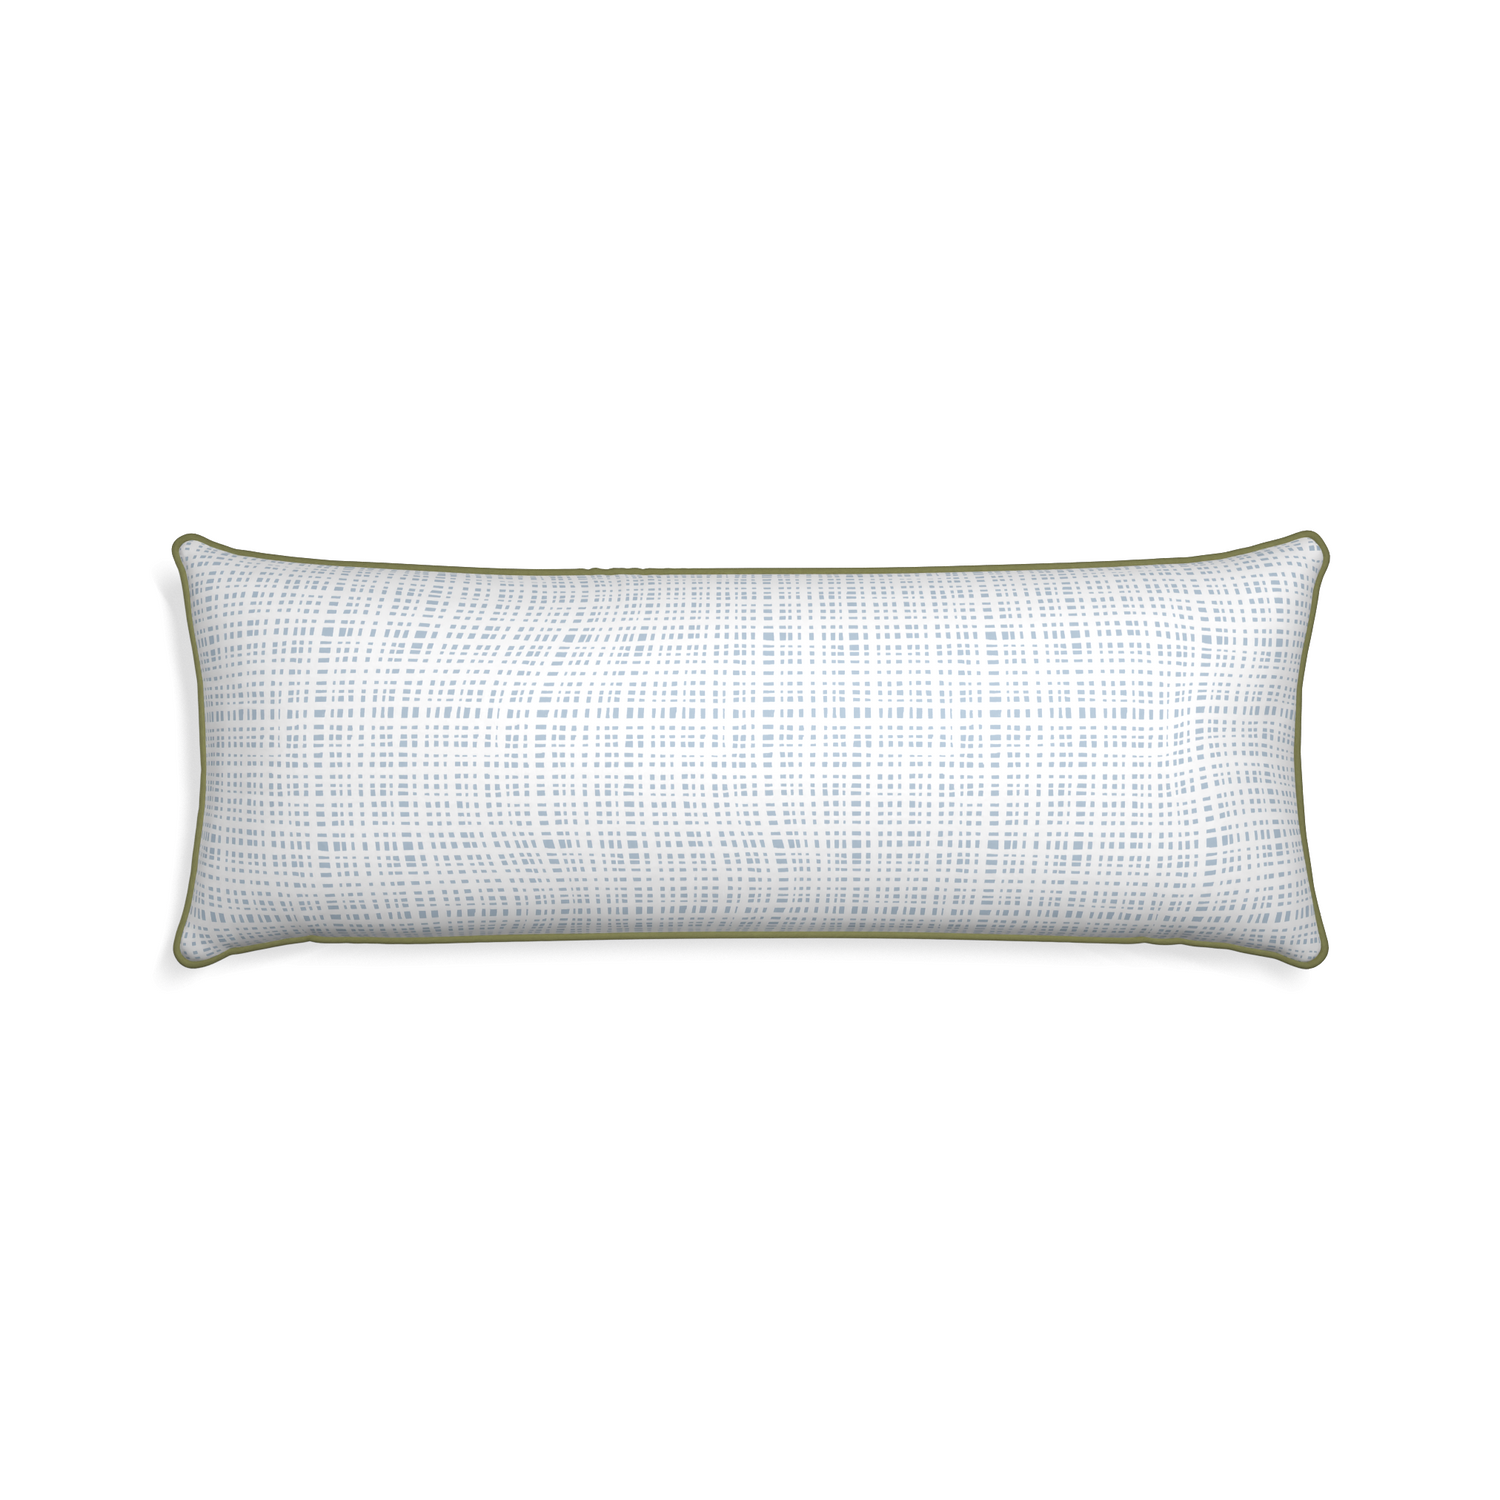 rectangle plaid sky blue pillow with moss green piping